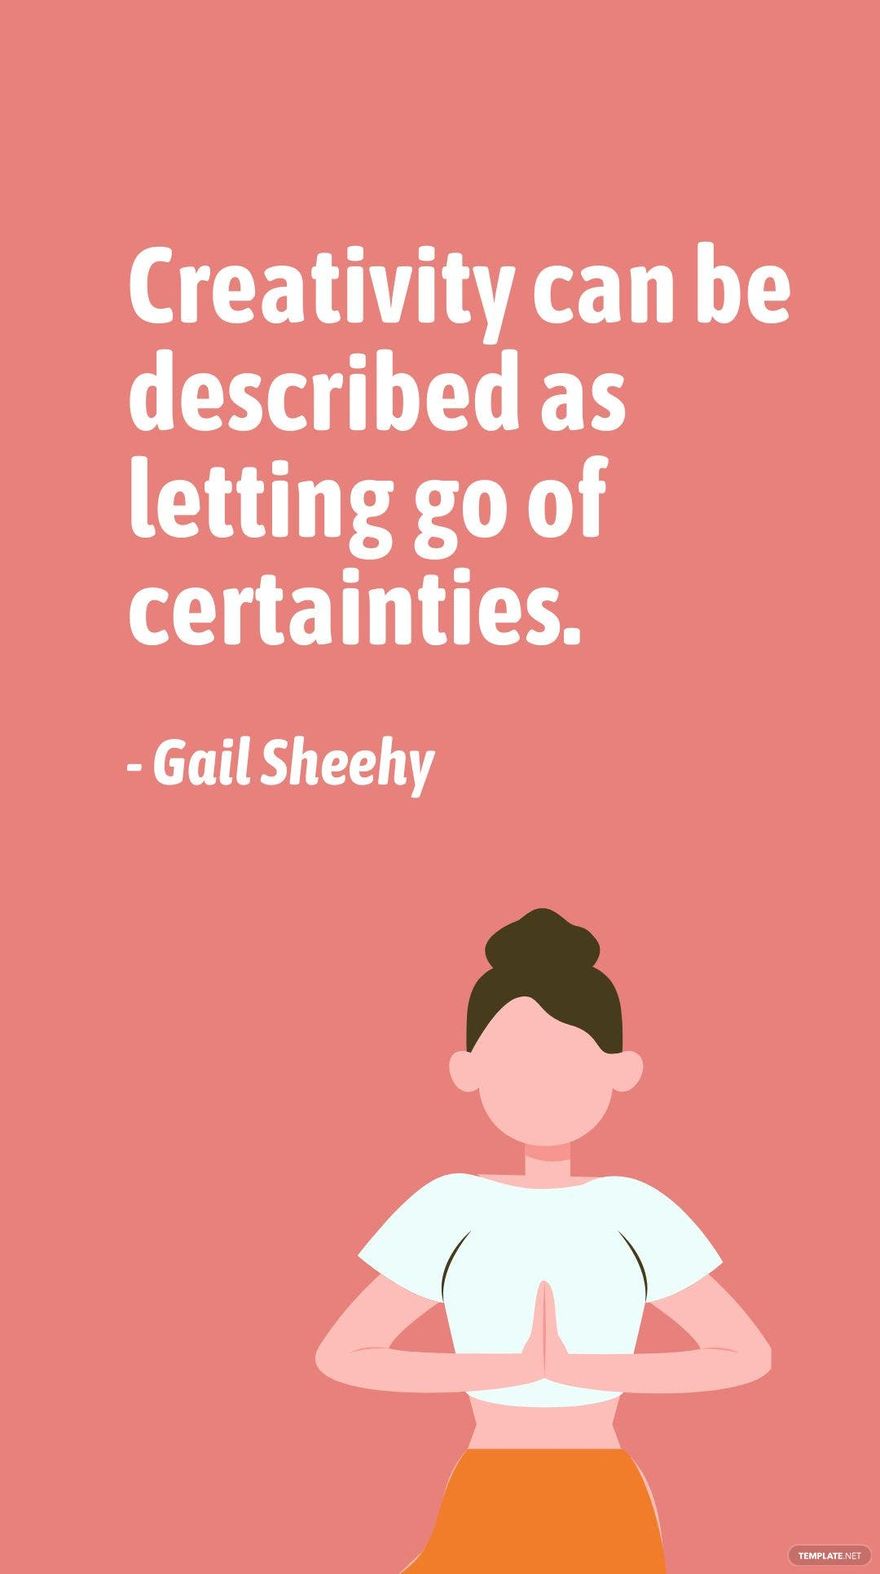 Gail Sheehy - Creativity can be described as letting go of certainties. in JPG